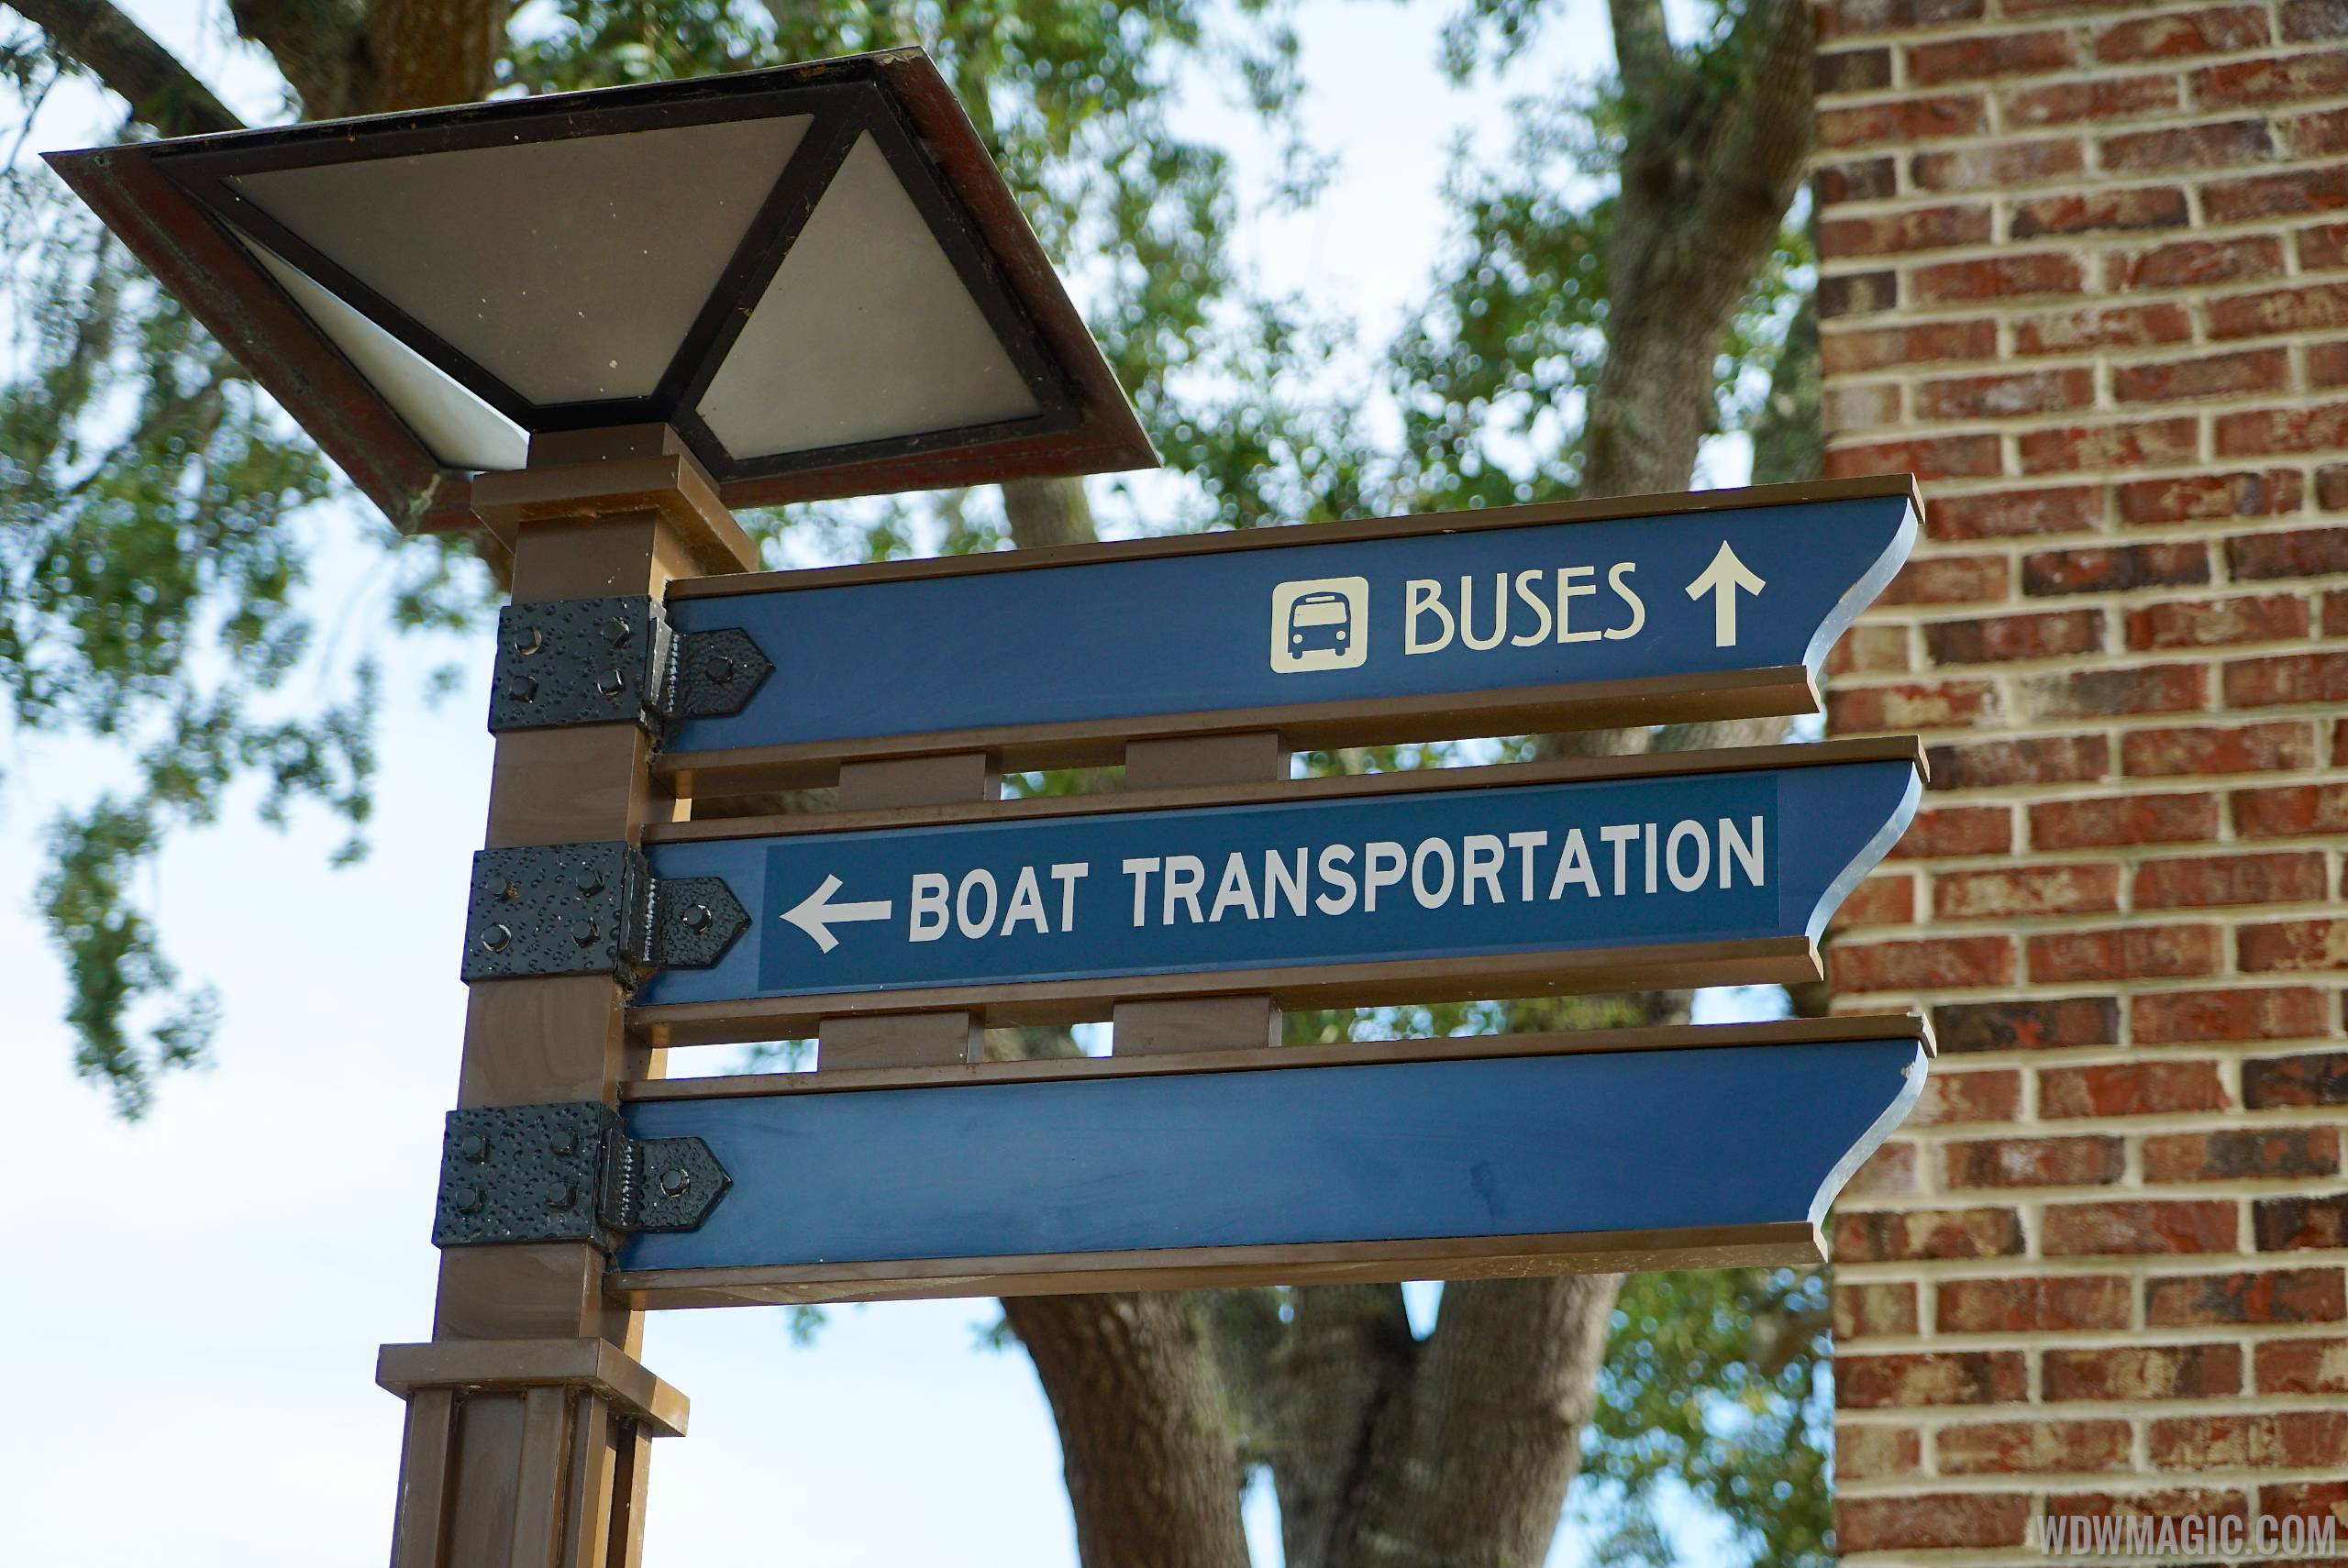 PHOTOS - Disney Springs Marketplace boat dock and walkway to Saratoga Springs opens